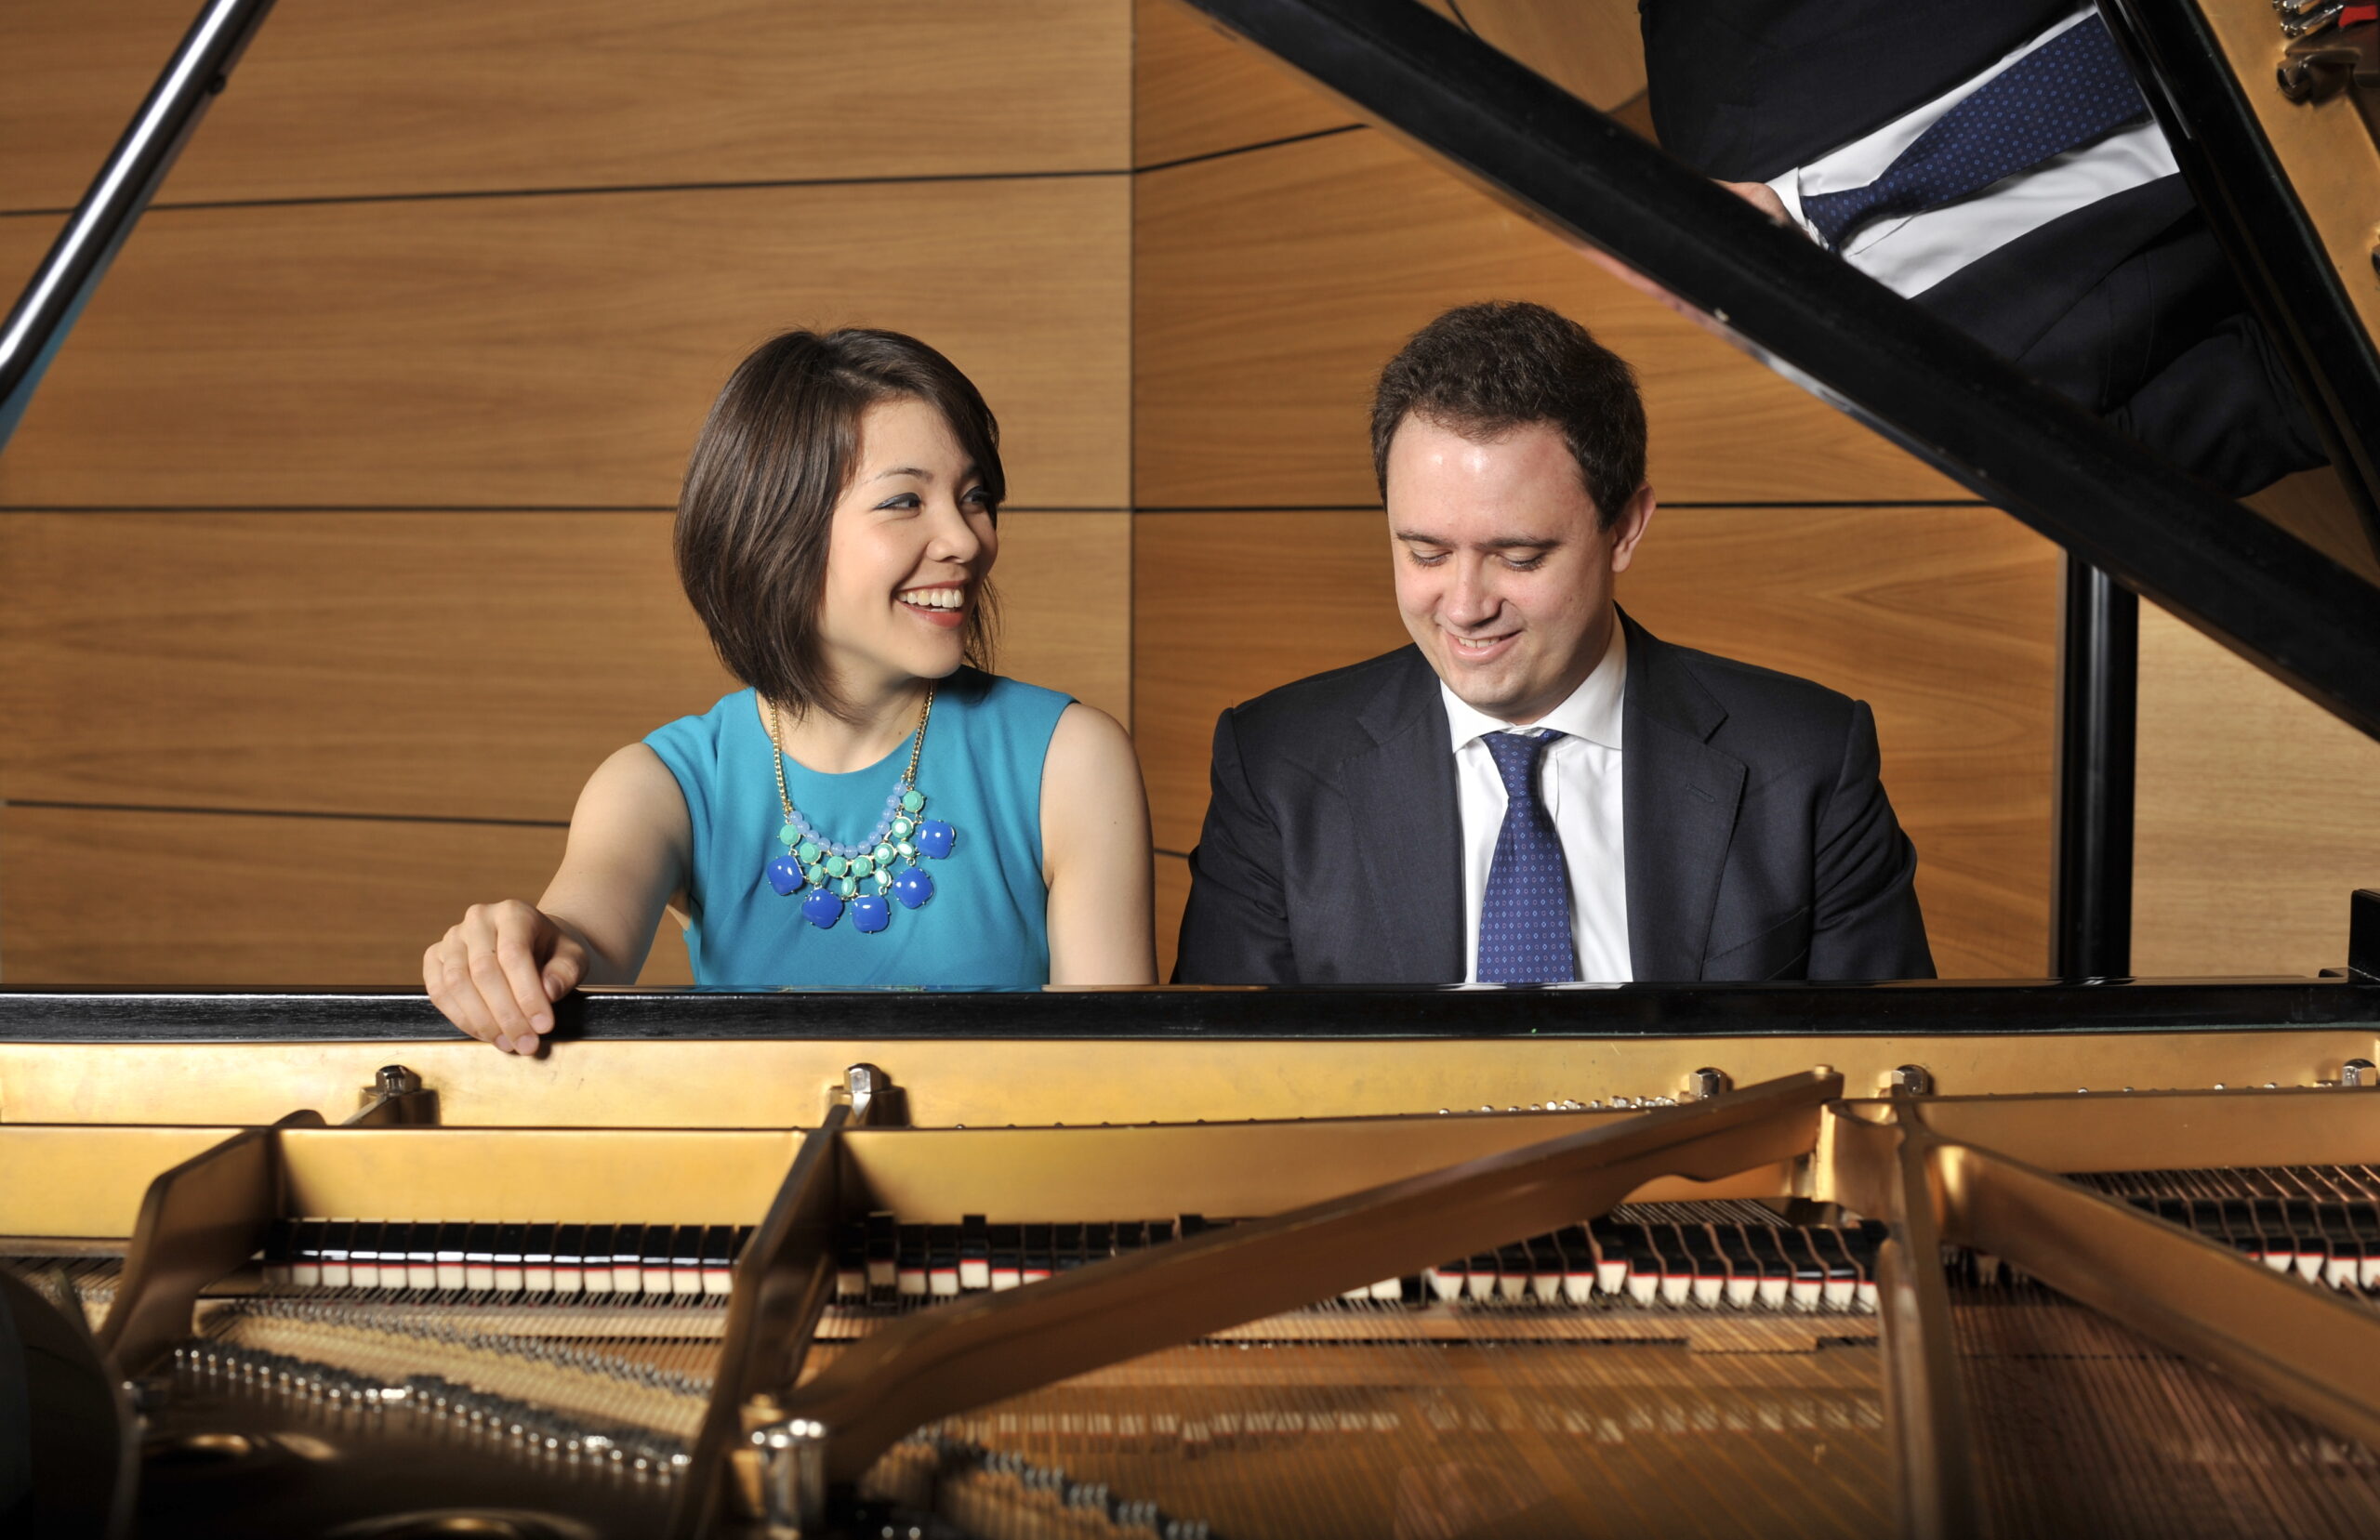 Man and woman sitting at a piano playing together